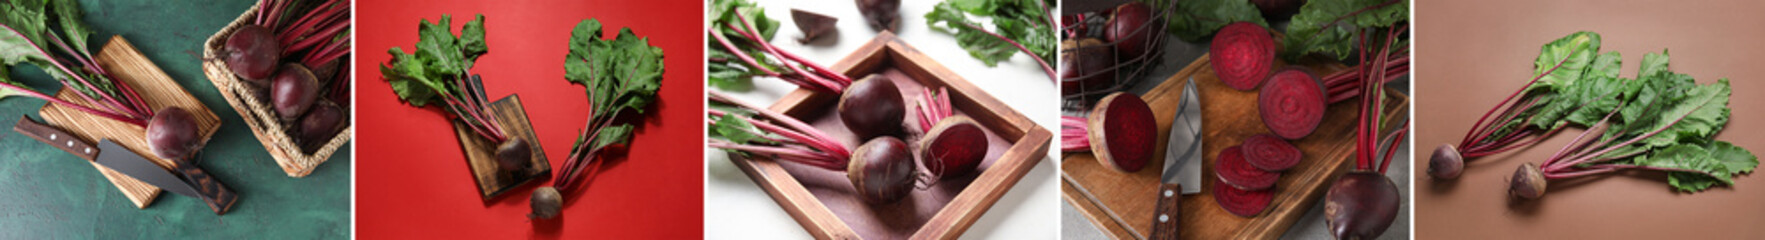 Collage of fresh red beetroots with cutting boards and knives